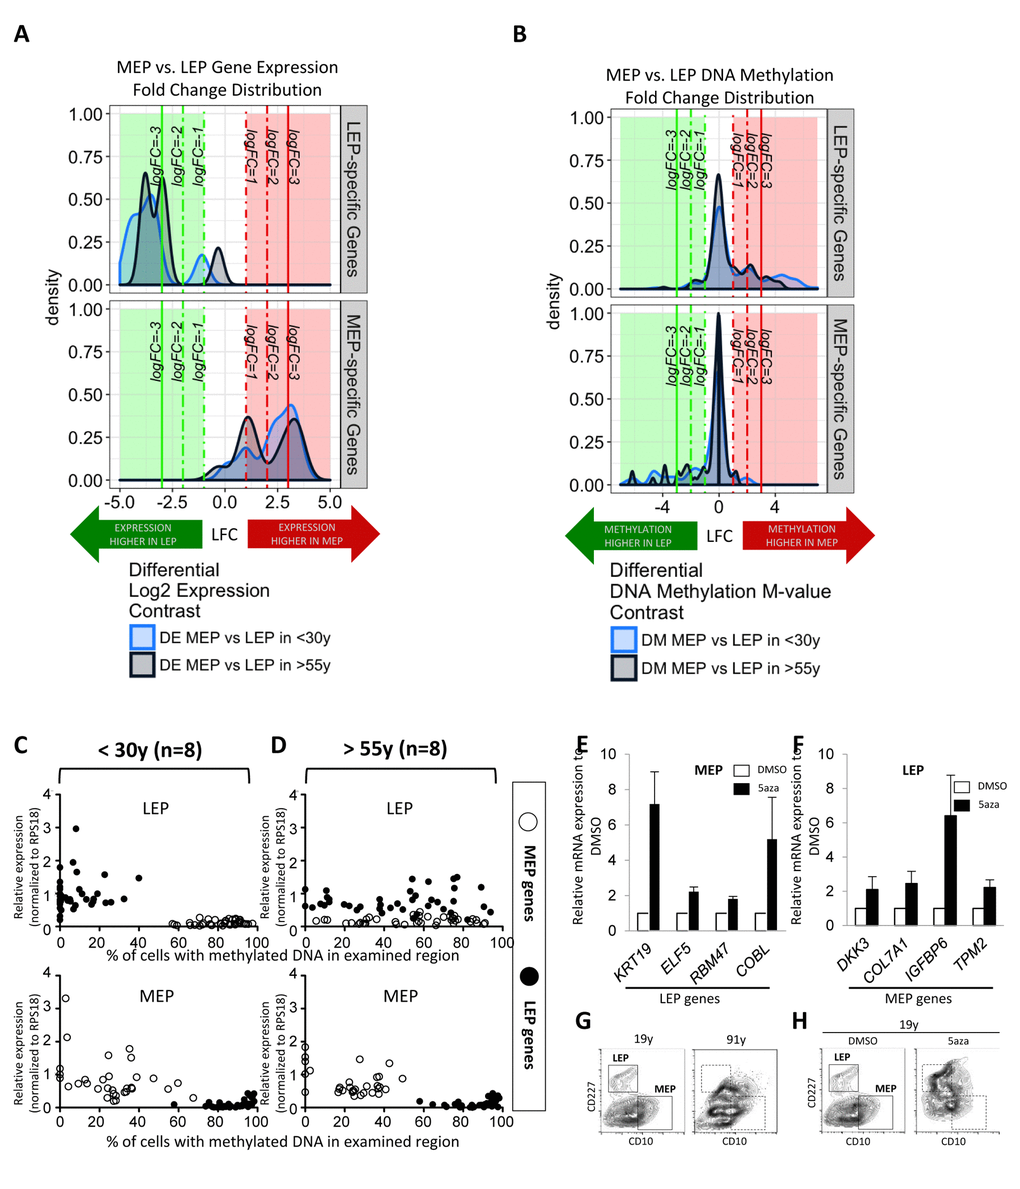 Age-dependent gene expression in luminal cells is associated with specific DNA methylation patterns. LEP- and MEP-specific probe sets were used to identify age-dependent changes in lineage-specific gene expression and DNA methylation patterns in FACS enriched 4p LEP and MEP. Corresponding expression of probeset genes in LEP and MEP cells from 9 different 4p HMEC strains representing 55y age groups in Illumina HumanHT-12 v4 BeadChips (Set1) were assayed for lineage-specific differential expression (DE) between MEP and LEP across 19 Illumina gene probes (A). Infinium 450K methylation arrays were then used to evaluate lineage-specific differential methylation (DM) based on methylation M-values of probeset genes across 247 CpG sites for the same subjects (B). Kernel Density Estimates (KDE) of distributions of log2 fold changes (LFC) in expression (A) or DNA methylation (B) between MEP vs. LEP in 55y (dark blue) subjects for LEP-specific genes (top panel) and MEP-specific (bottom panel) are shown. Colored regions and lines highlight fraction of genes or CpG sites which show lineage-specific differential expression or methylation respectively (≥ 1-, ≥ 2-, ≥ 3- absolute LFC and Benjamini-Hochberg, BH, adj. p-val C and D) Dysregulation of lineage specific gene expression with age in LEP was associated with age-dependent DNA methylation patterns. The relationship between expression and methylation of lineage-specific genes in FACS enriched LEP and MEP from women (C) D) >55y, is visualized using dot plots. LEP probes are shown as filled circles, MEP probes are shown as open circles. A change in the lineage-specific relationship was most prominent in older LEP. Eight strains were used for each age group, expression data were normalized to expression of RPS18. Bar graphs showing expression of (E) LEP genes in MEP treated with 5’aza, and (F) MEP genes in LEP treated with 5’aza, showing that these lineage specific genes were regulated in part by DNA methylation. (G) Contour plots representing CD10 and CD227 expression measured by FACS on HMEC from a 19y and a 91y woman, which are representative of the phenotypes typically observed in these extreme age groups. Corresponding areas were shown with dotted line boxes. (H) CD10 and CD227 expression in HMEC from a 19y woman treated with DMSO or DMSO+5’aza at 15 μM for 48h. Young HMEC phenocopied older HMEC following 5aza treatment. Gates used to delineate lineages are indicated with boxes.